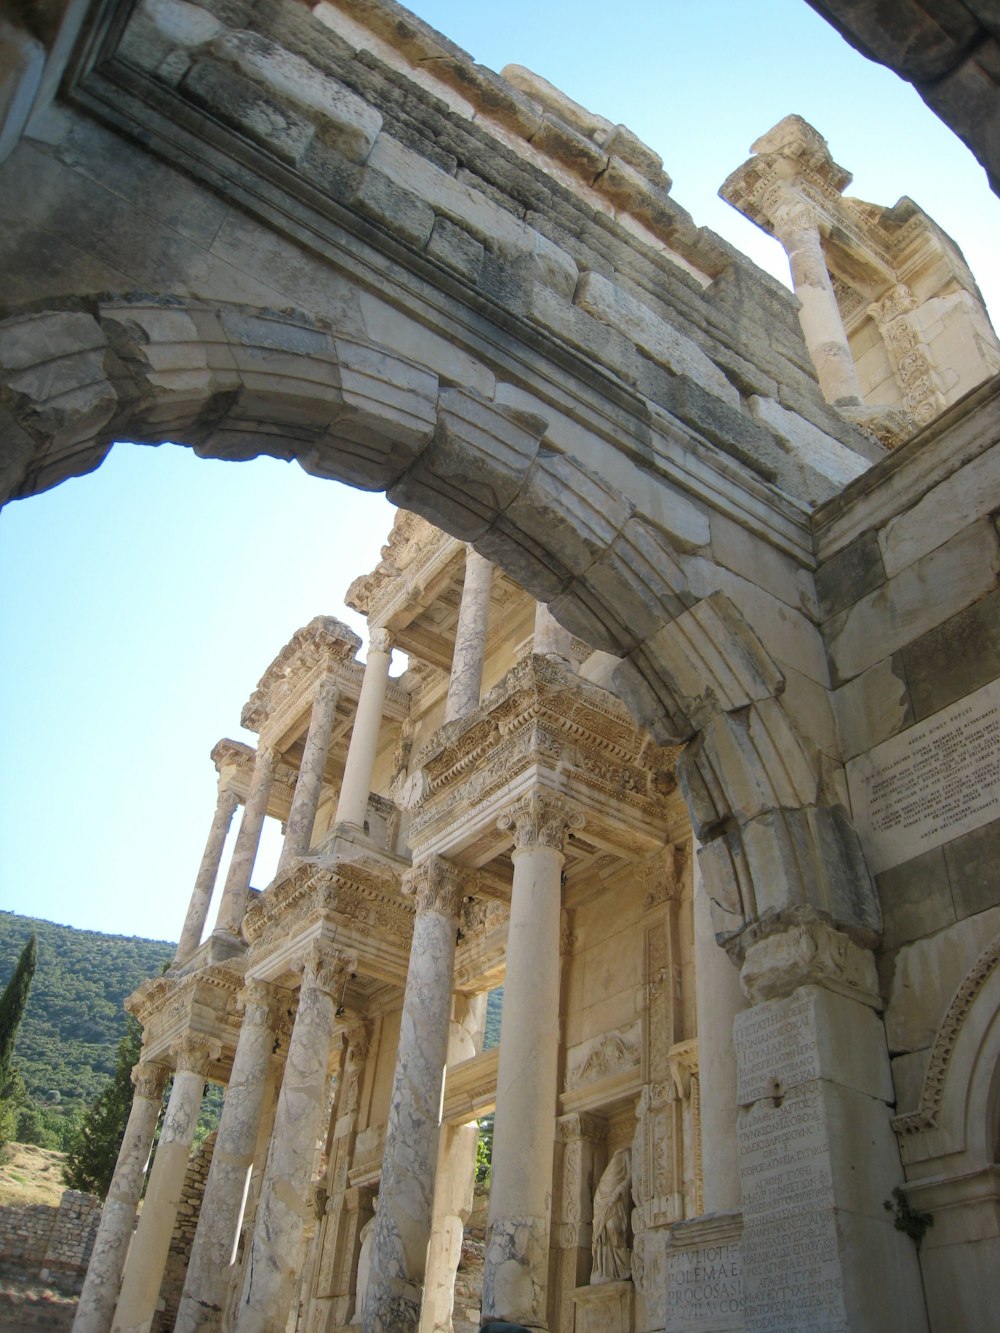 an arch in a stone building with columns